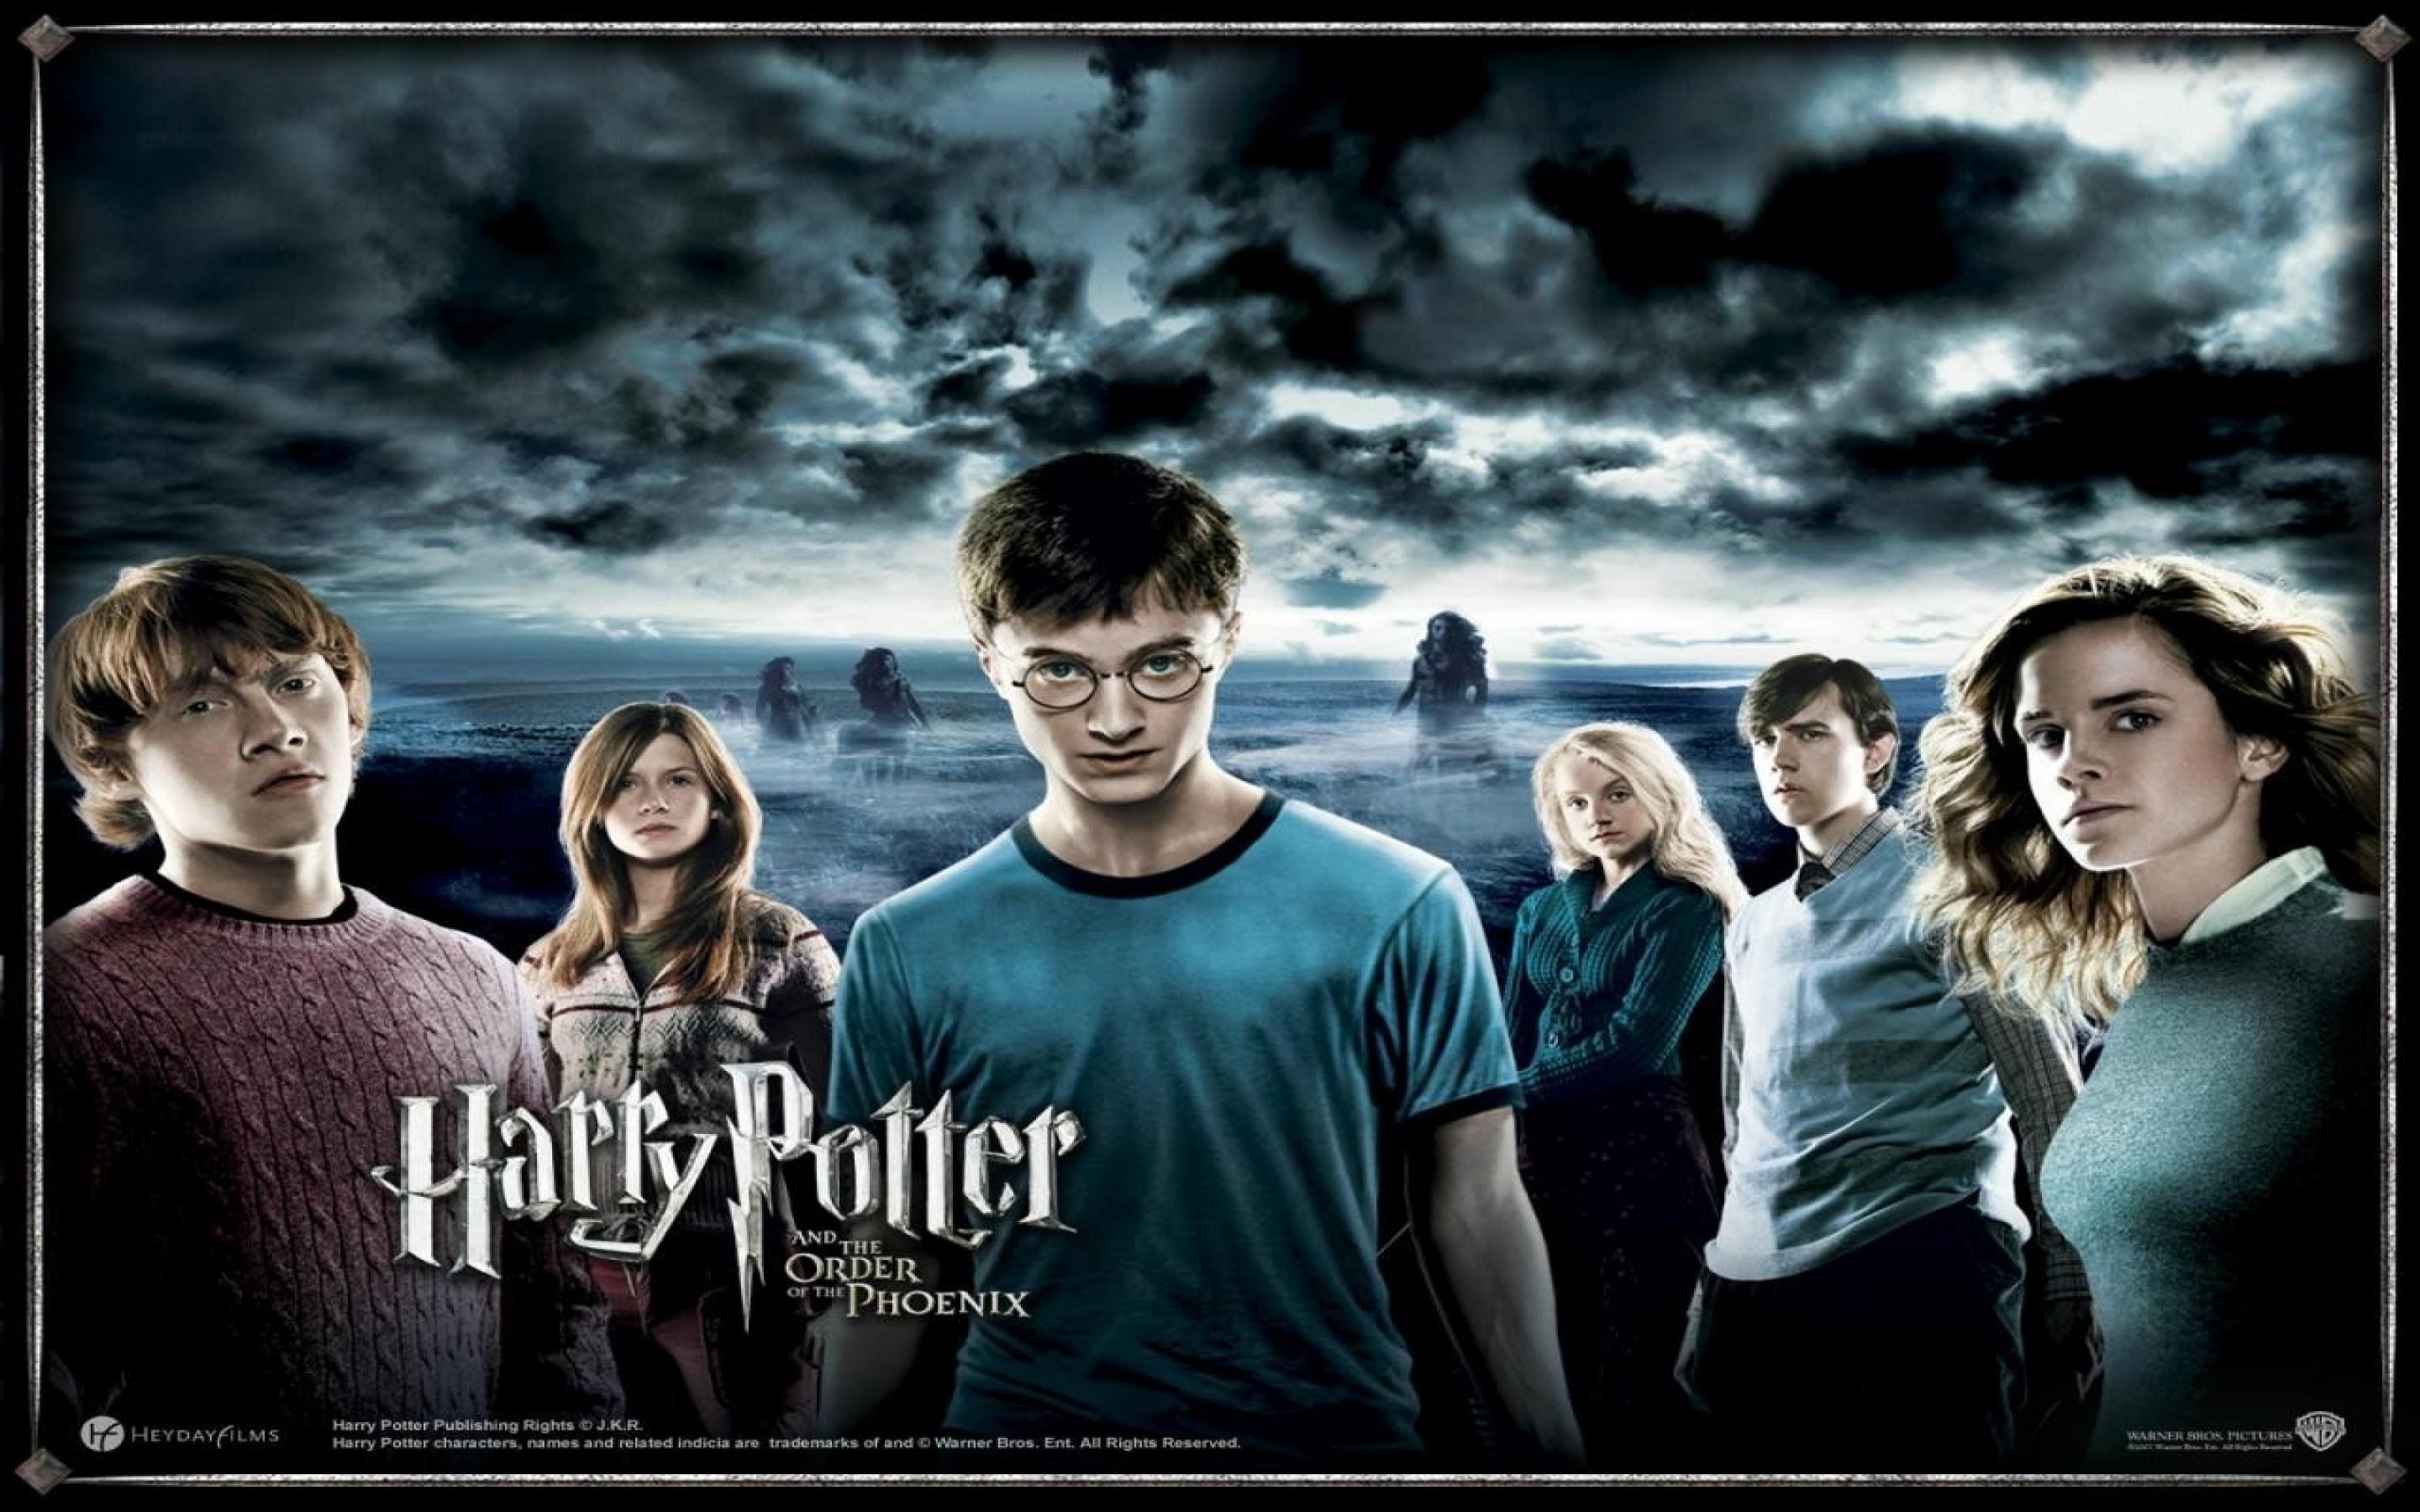 Harry Potter HD Wallpapers 2880x1800 Movie Wallpapers 2880x1800 2880x1800